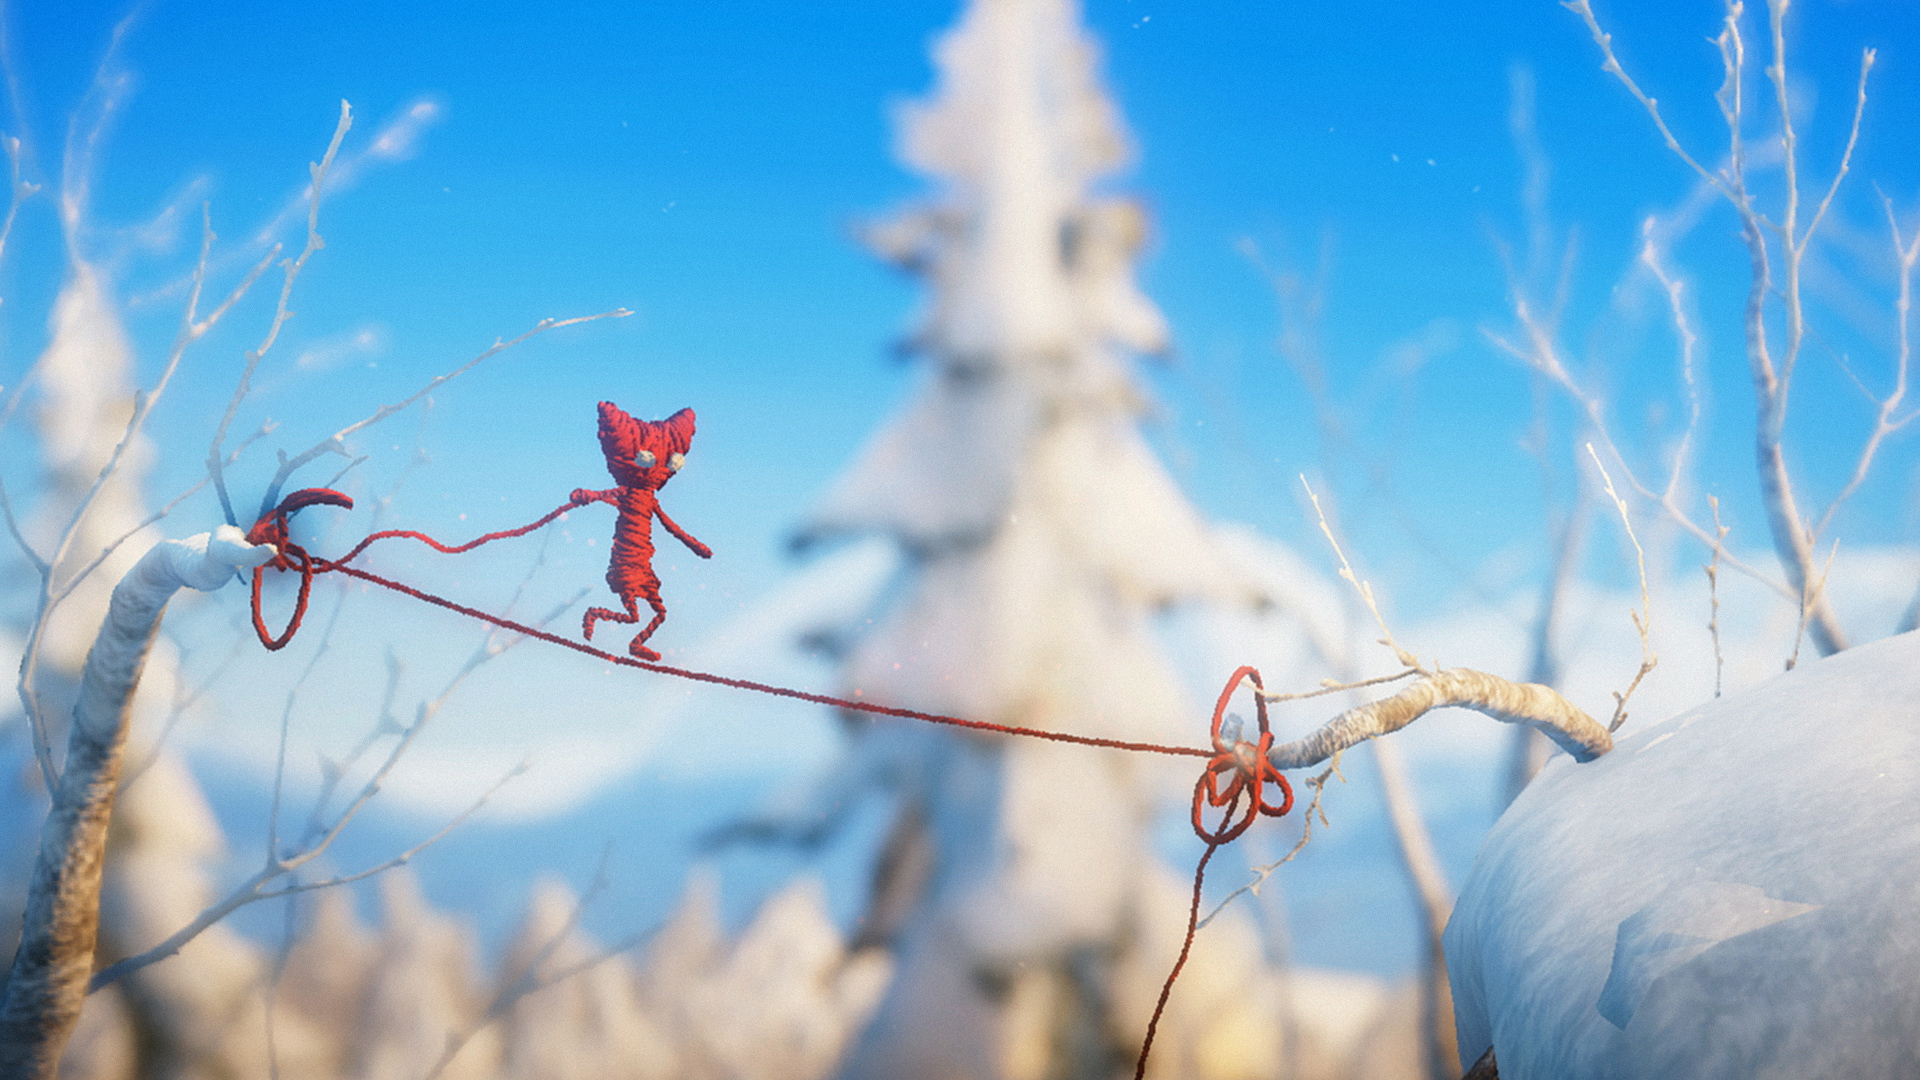 Unravel Two - Xbox One Download Code